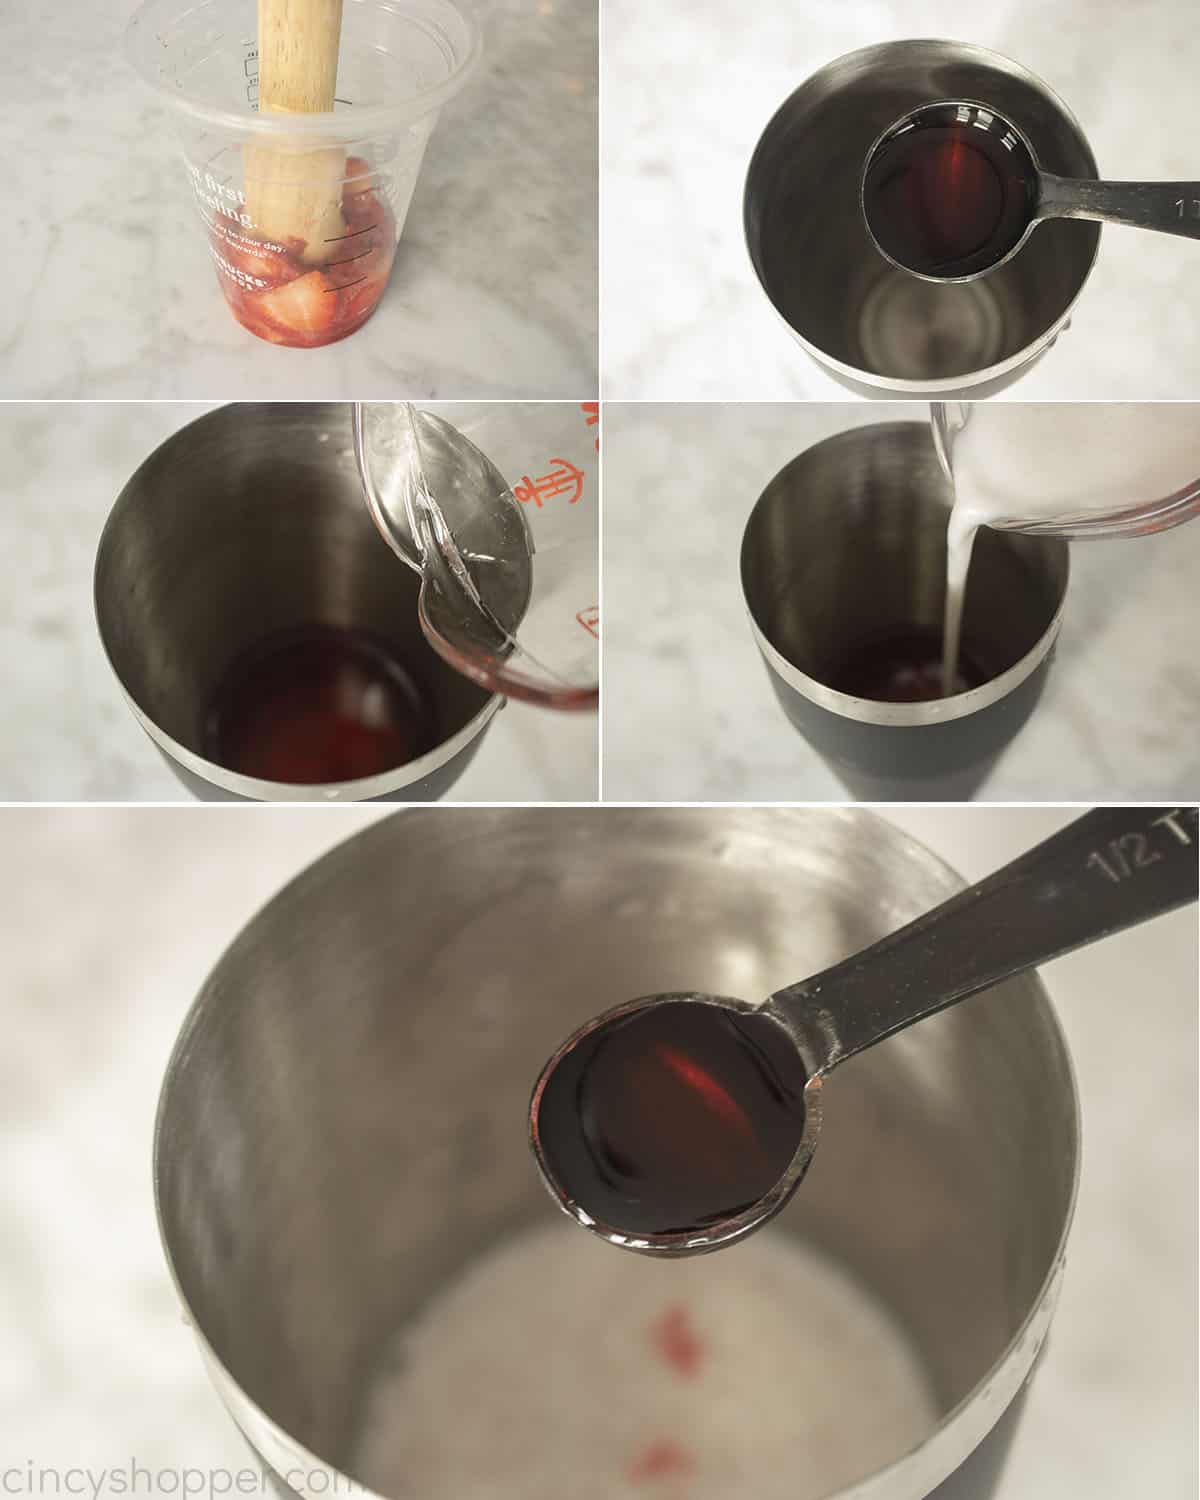 Process collage showing how to make Pink Drink from Starbucks.